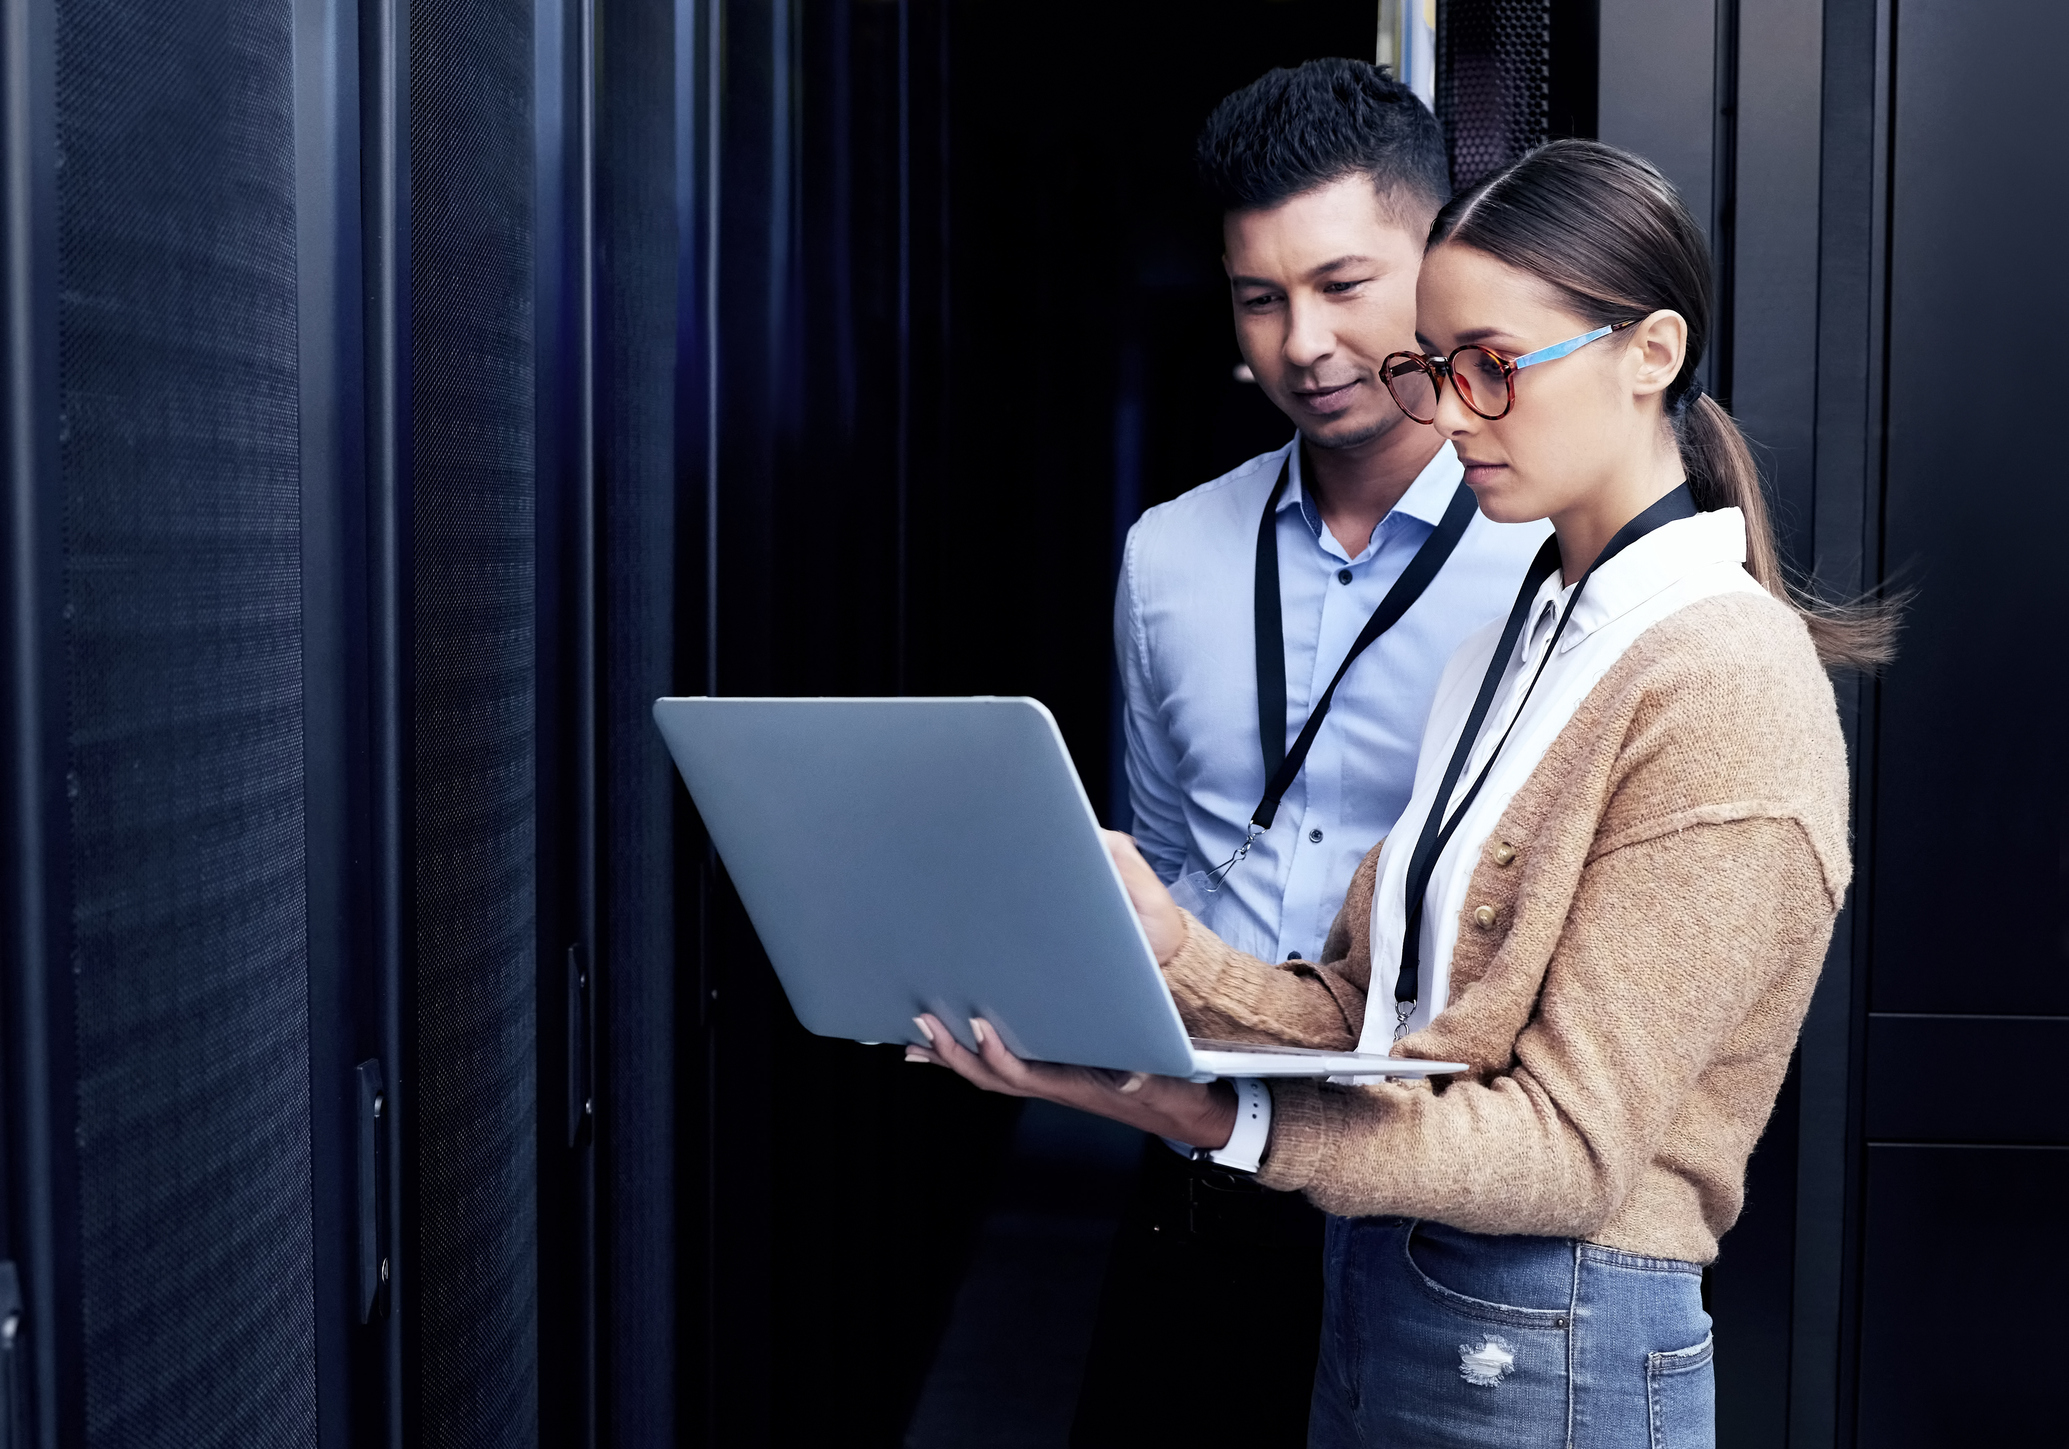 Two people on a laptop in a server room